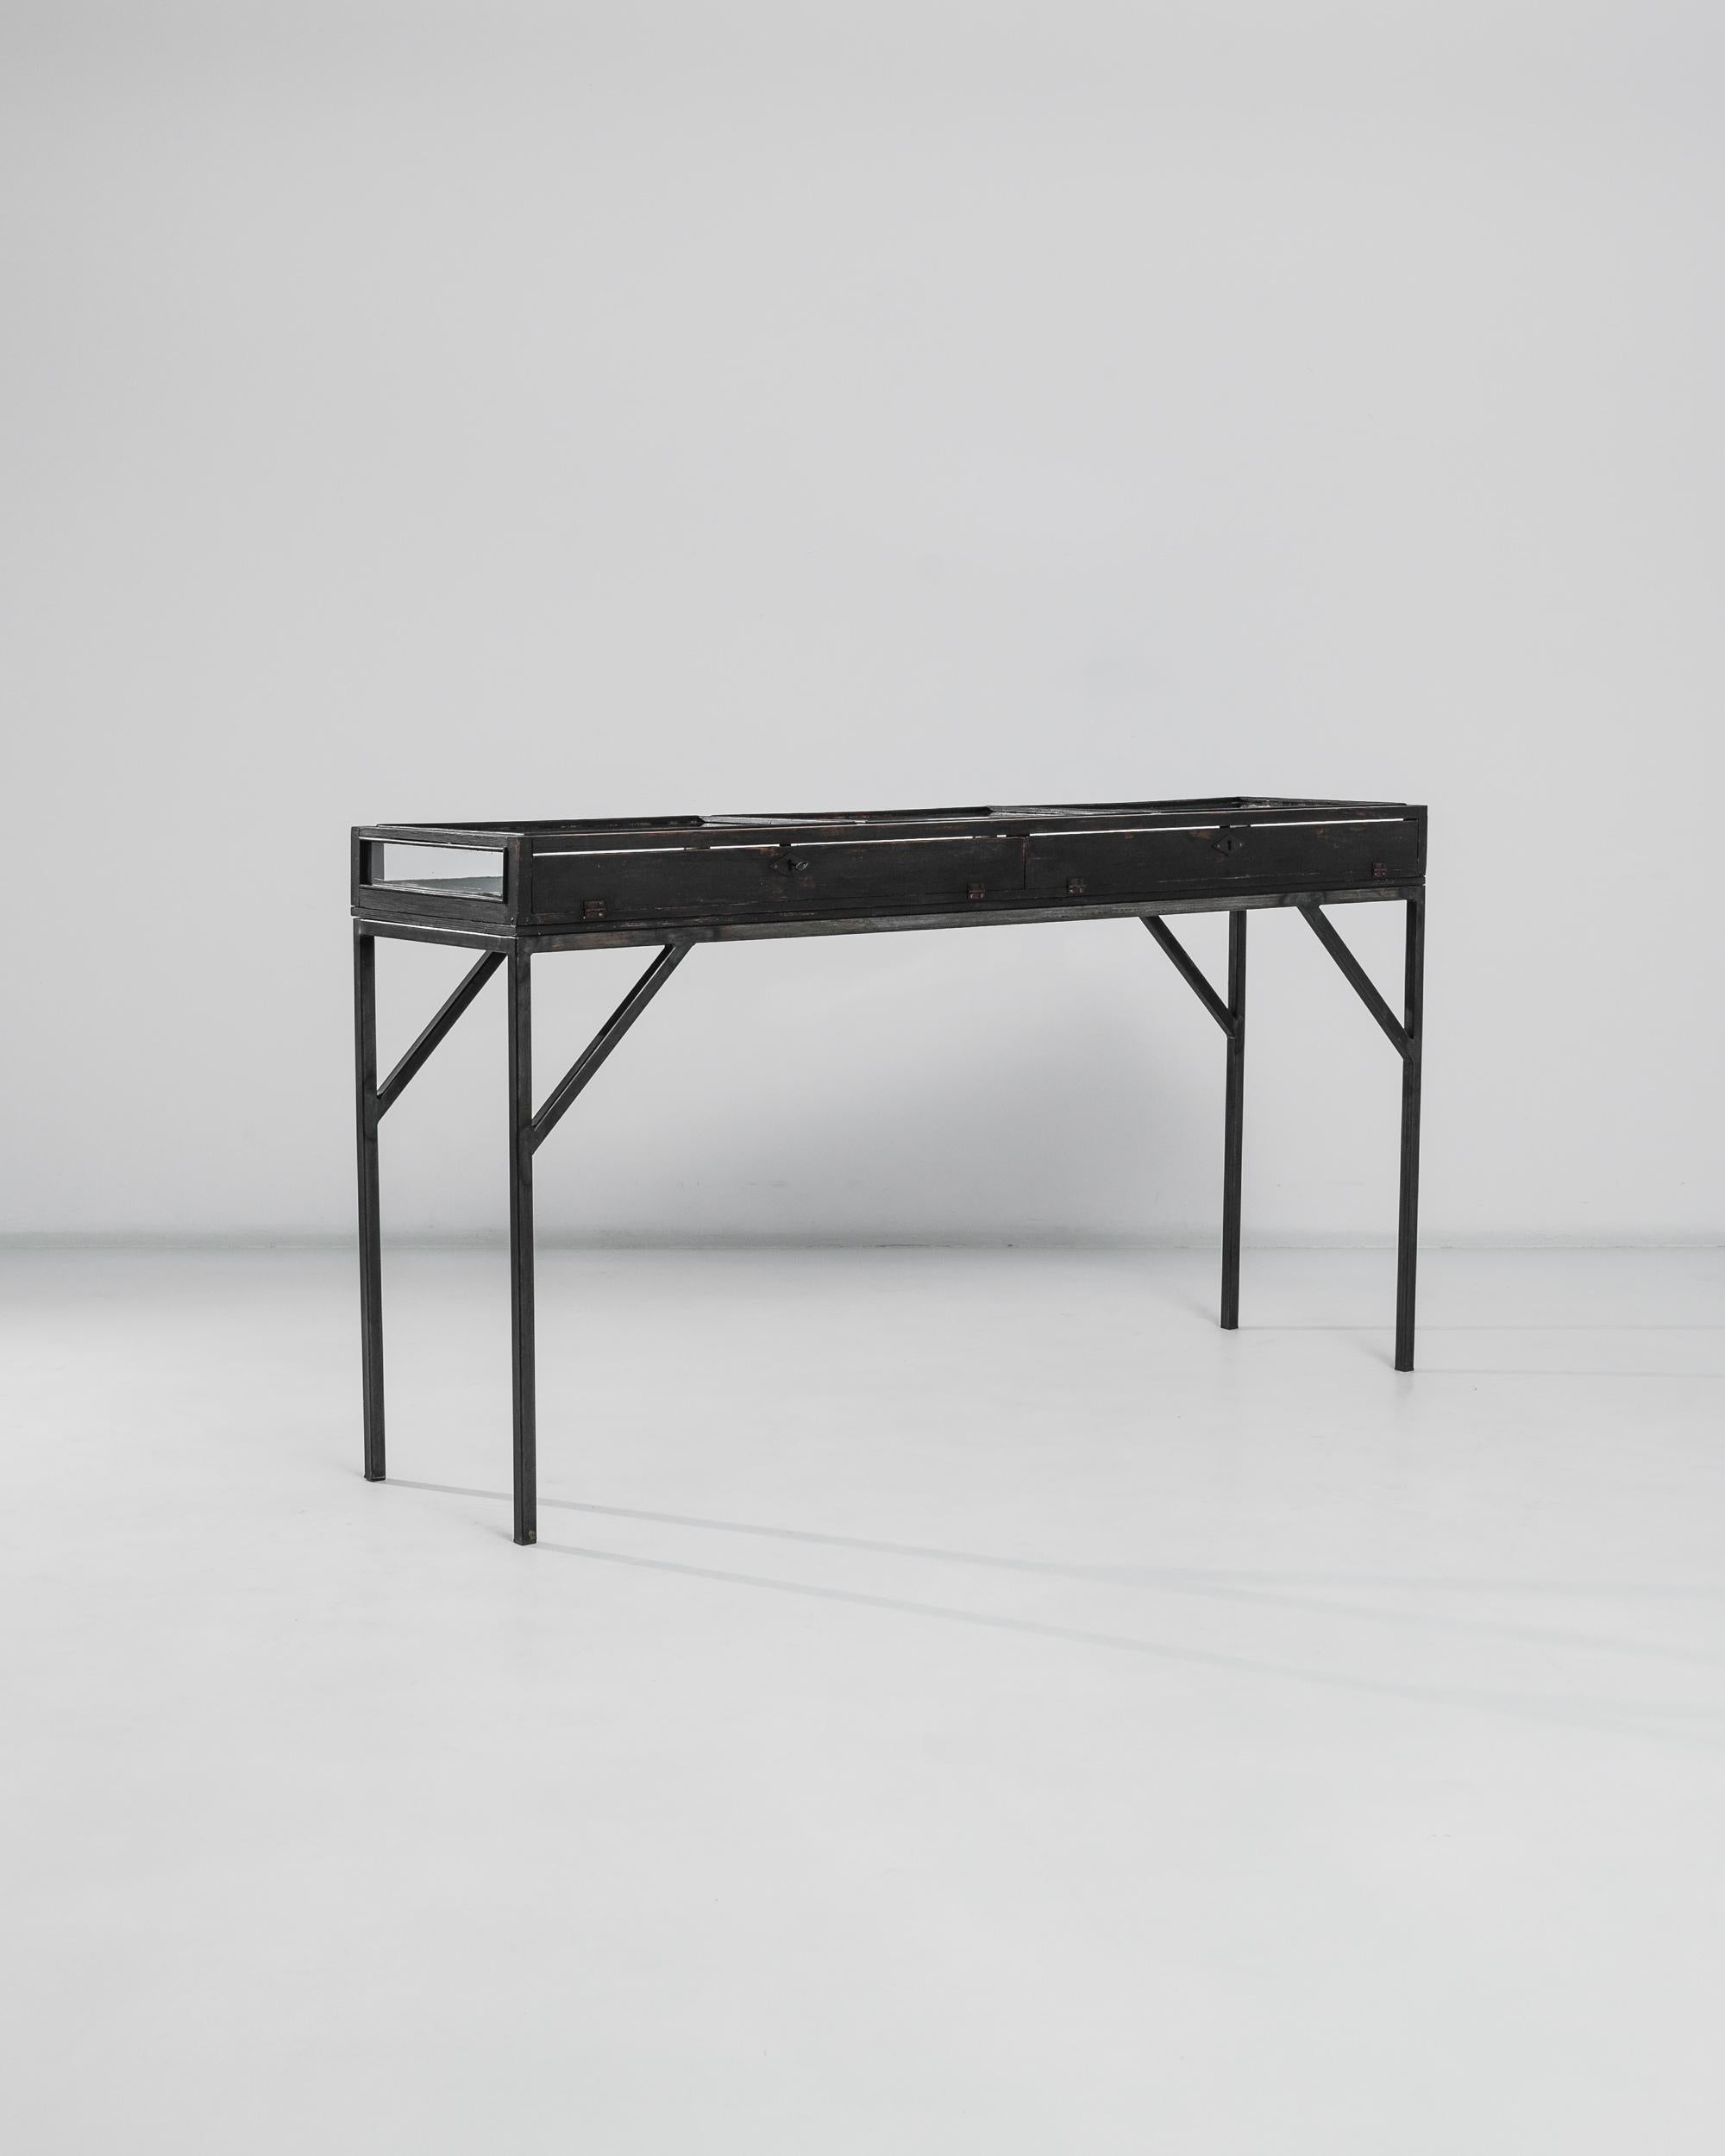 A metal and wooden display table made in 1920s France. Metal keys unlatch this minimal vitrine, allowing access to its delicate interior. A bright brownish red wood hue is revealed in flashes upon the painted exterior of the table, producing a